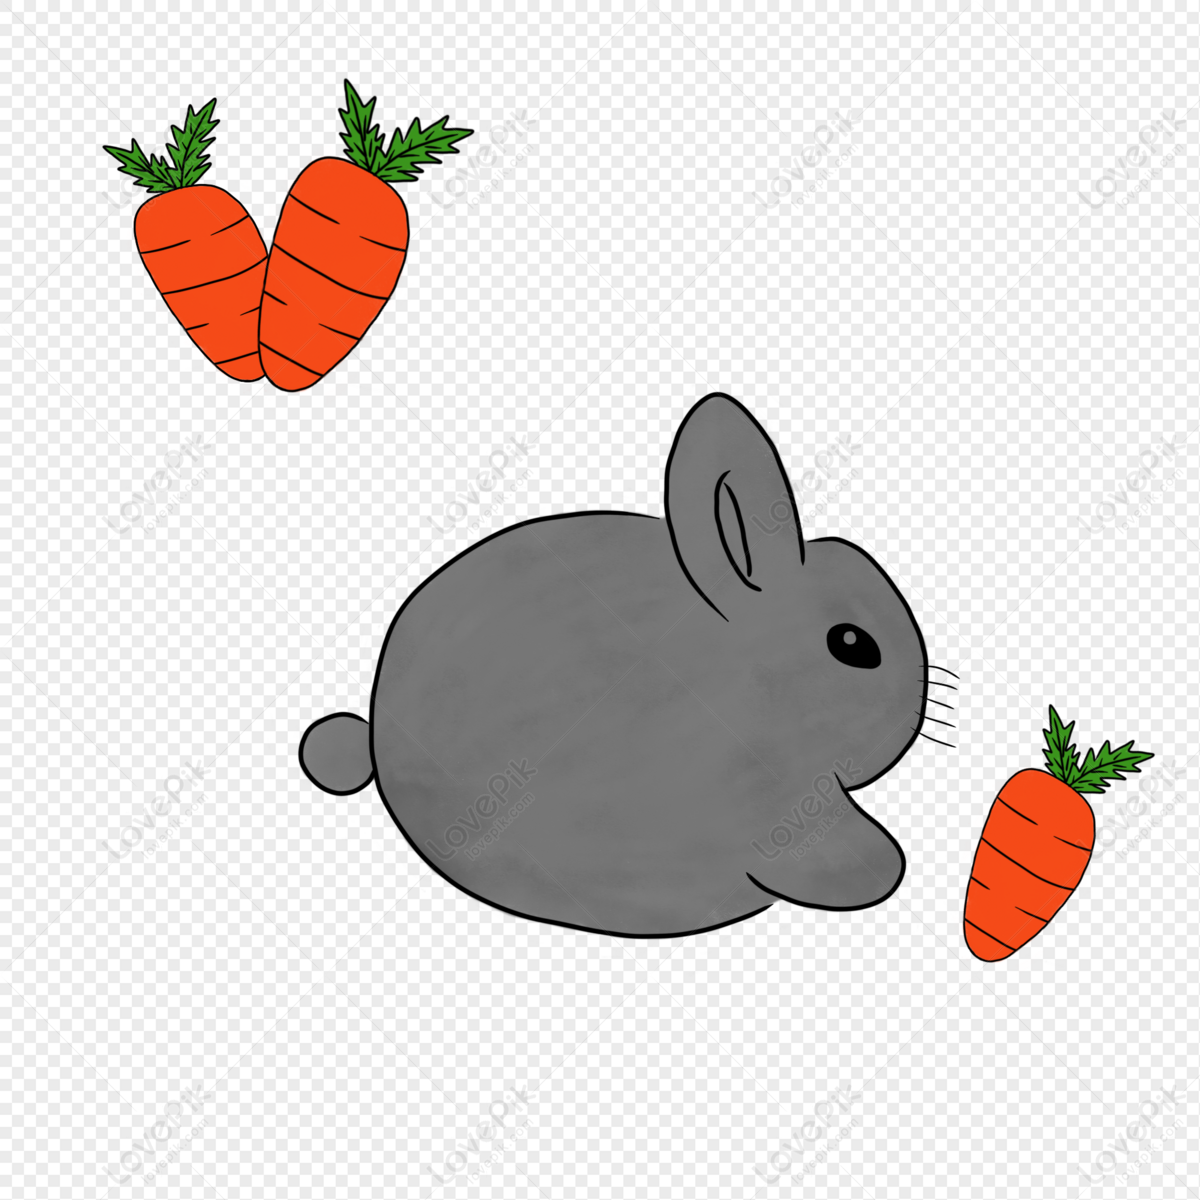 Rabbit Eating Carrot PNG Free Download And Clipart Image For Free Download  - Lovepik | 401206503